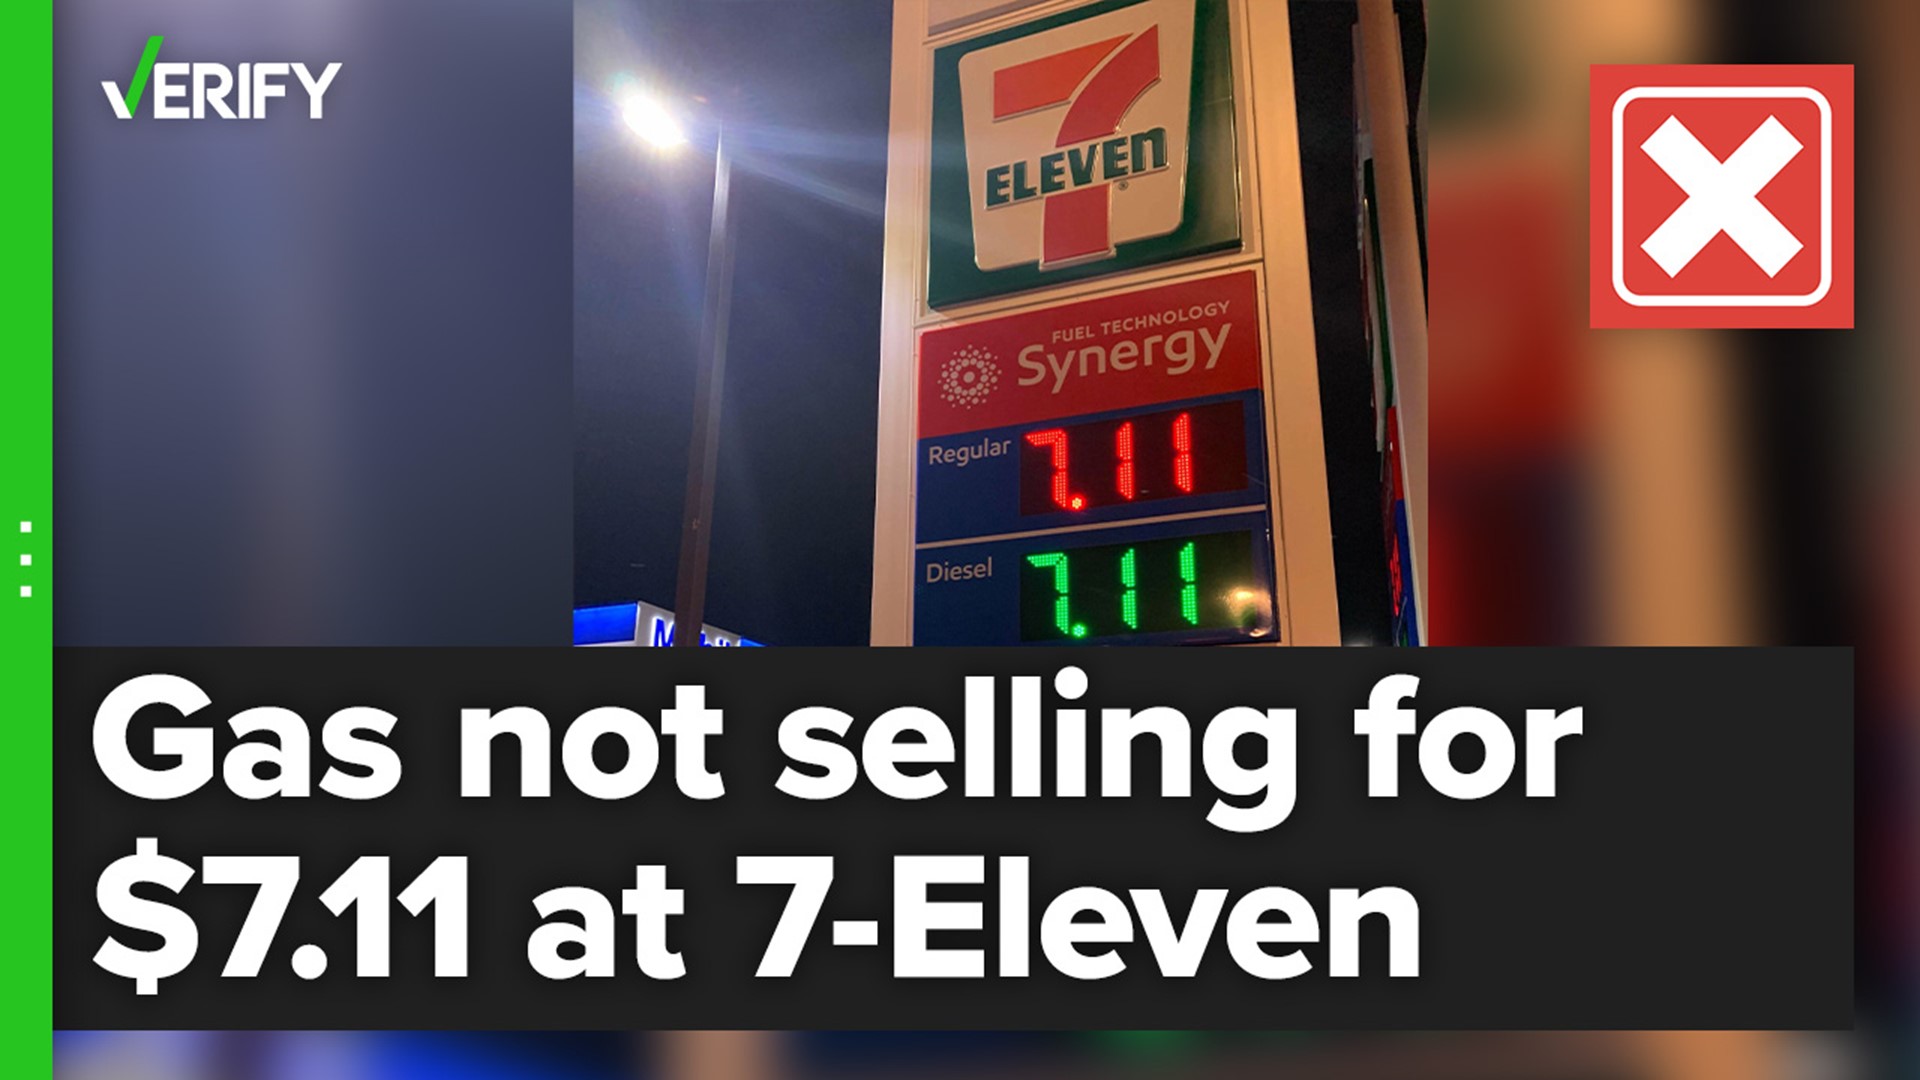 A photo circulating on Twitter that shows gas selling for $7.11 per gallon at 7-Eleven was taken more than one year ago and shows a new station testing its sign.